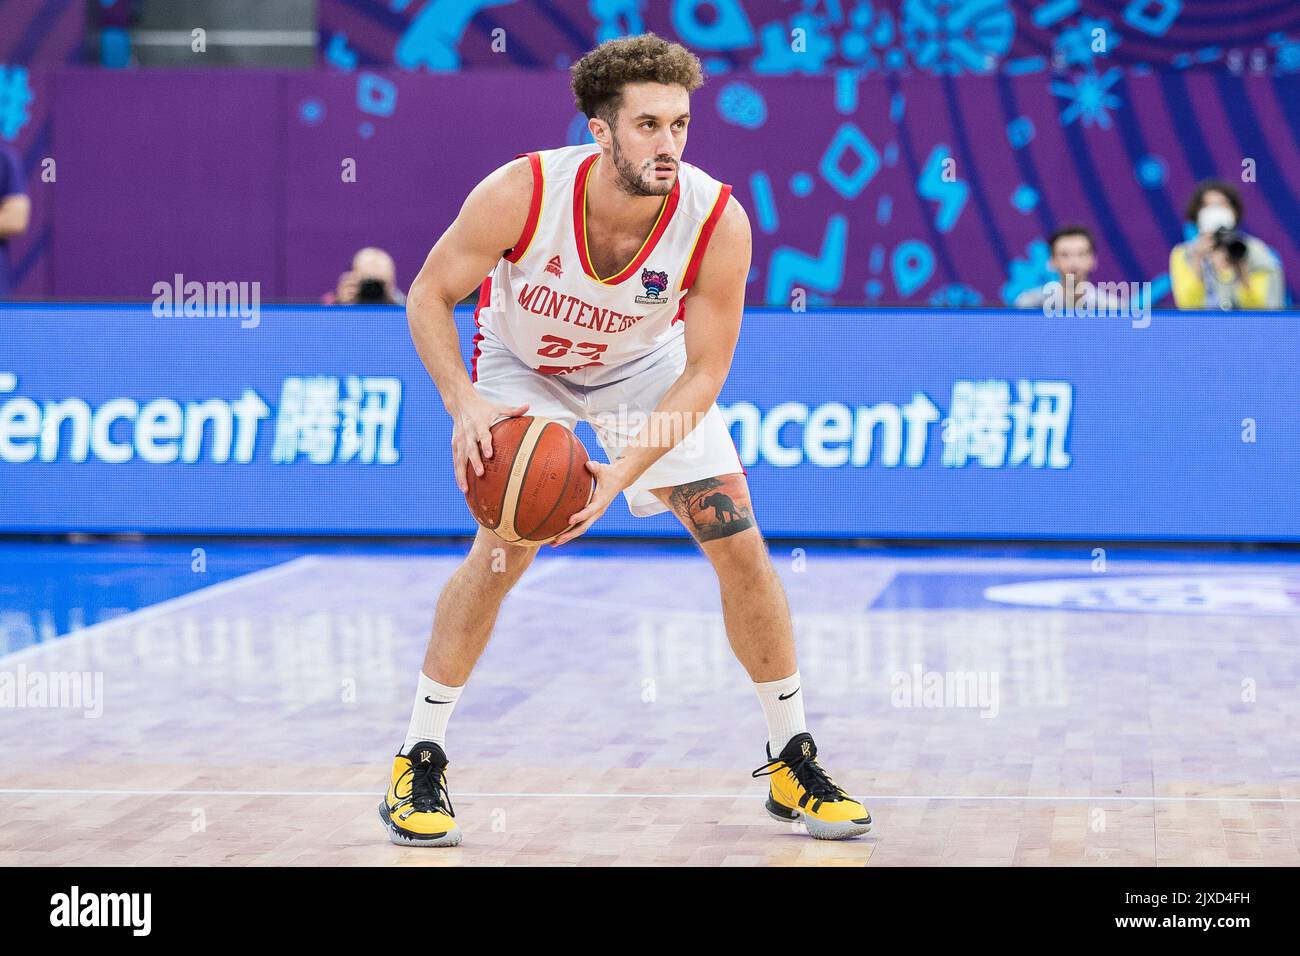 Tbilisi, Georgia, 6th September 2022. Igor Drobnjak of Montenegro in action during the FIBA EuroBasket 2022 group A match between Montenegro and Spain at Tbilisi Arena in Tbilisi, Georgia. September 6, 2022. Credit: Nikola Krstic/Alamy Stock Photo